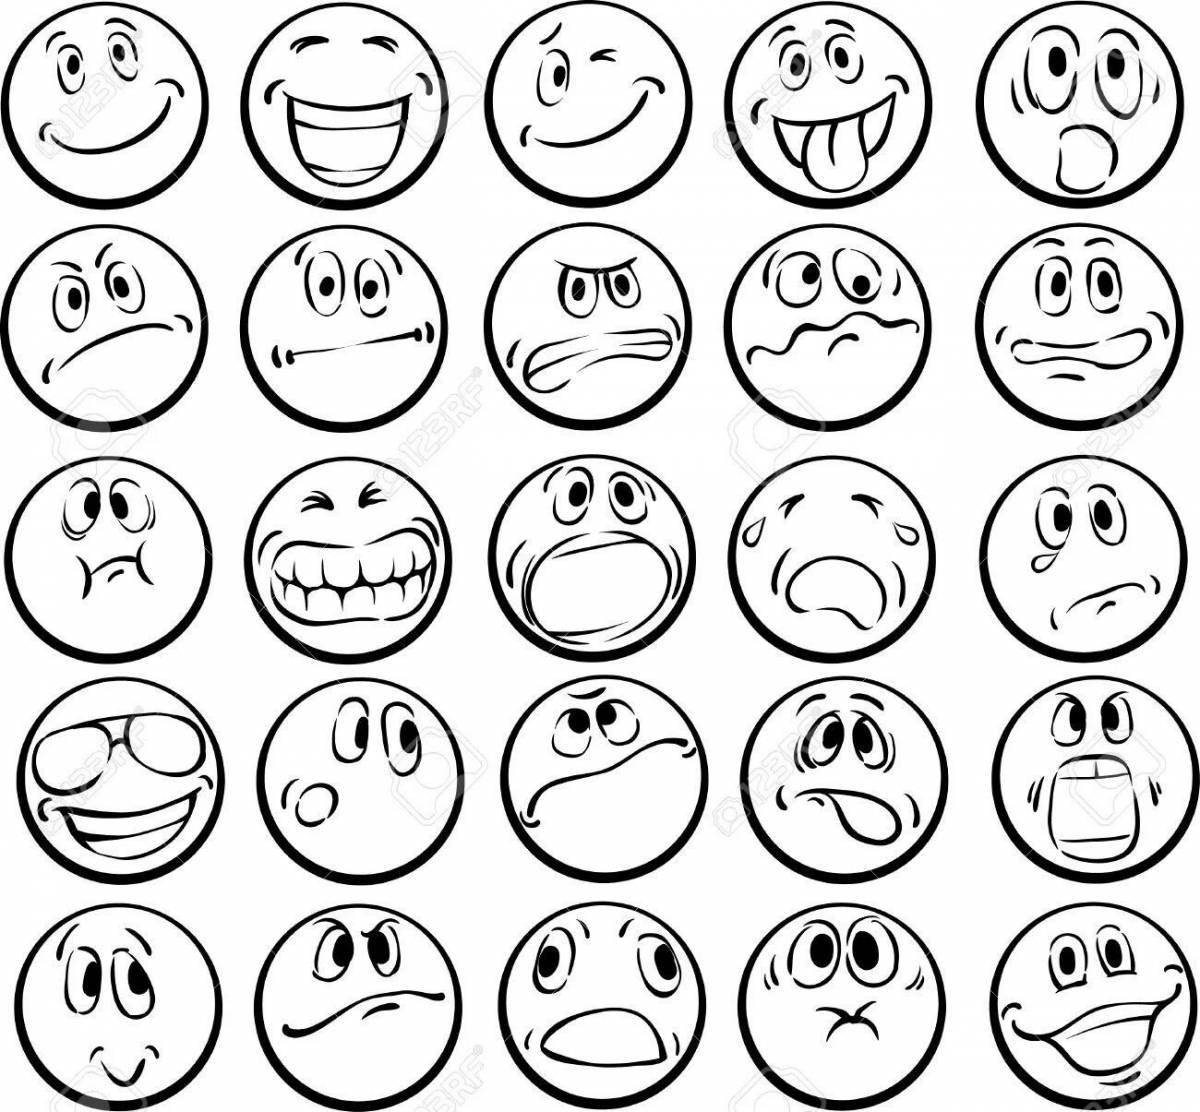 Cute coloring pages of indie kid emoticons